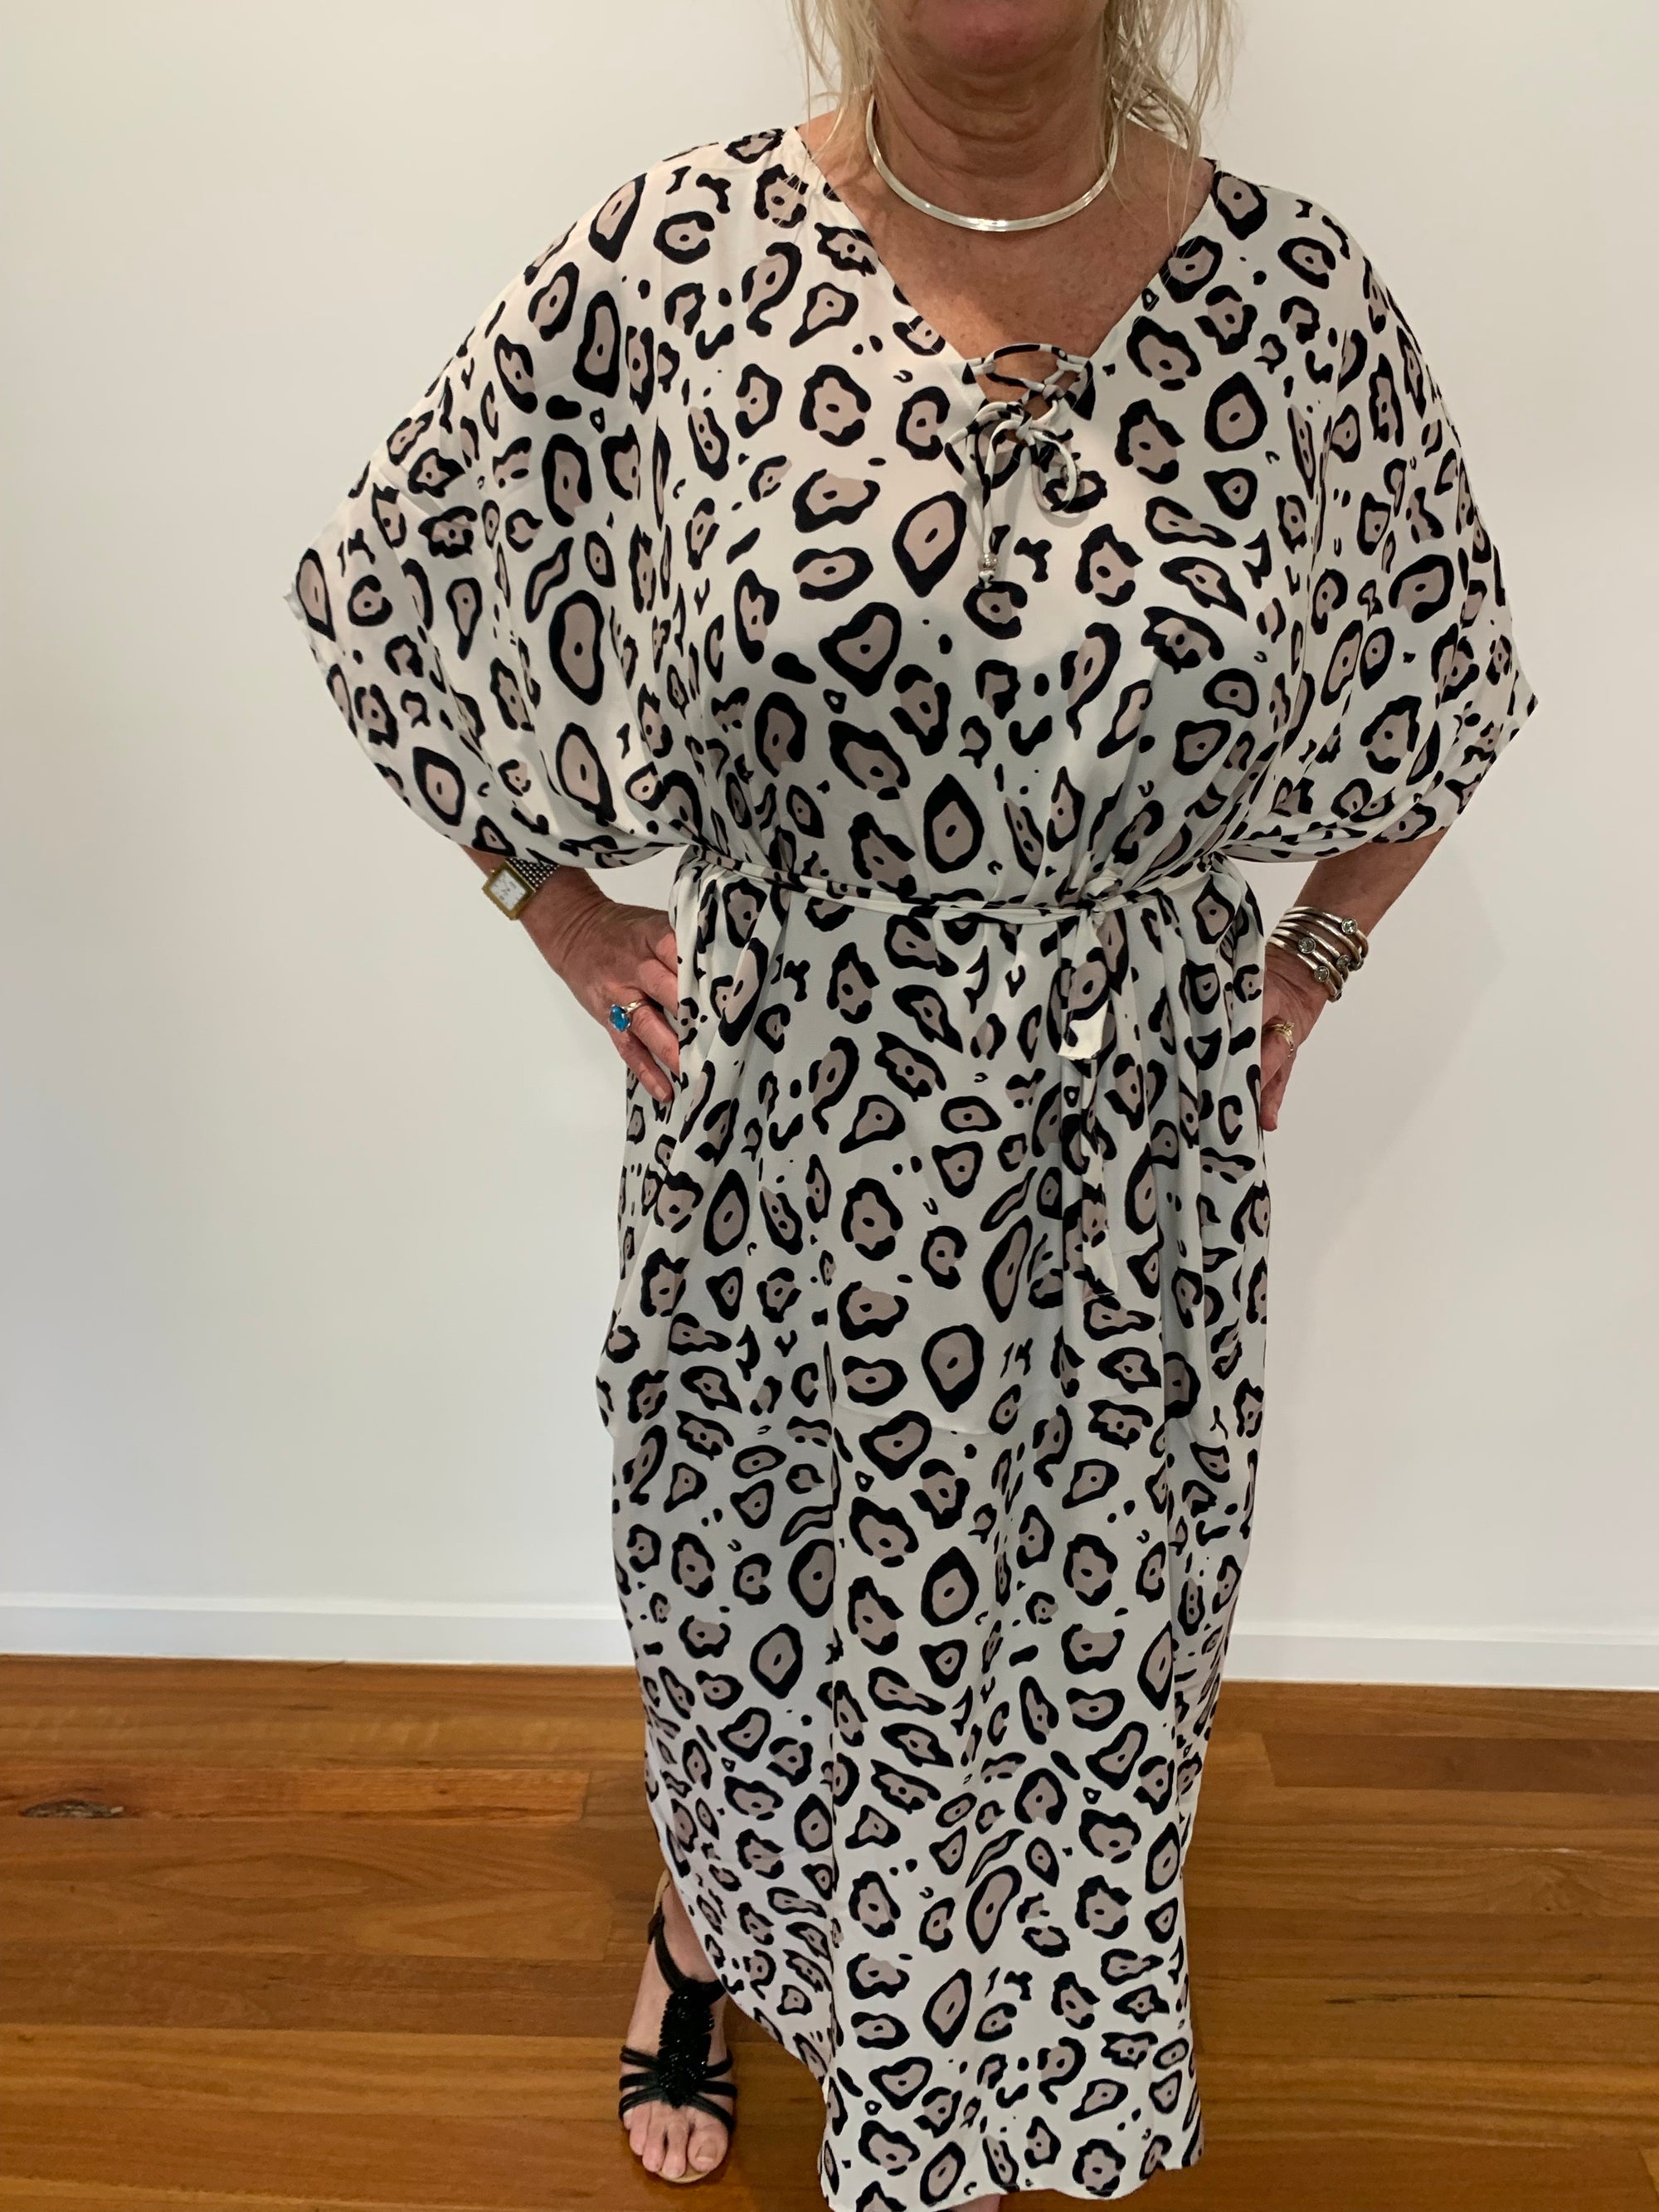 Oversized Kaftan/Dress in White with Leopard Print One Size Will Fit Size 14-20 - Scandi & Me